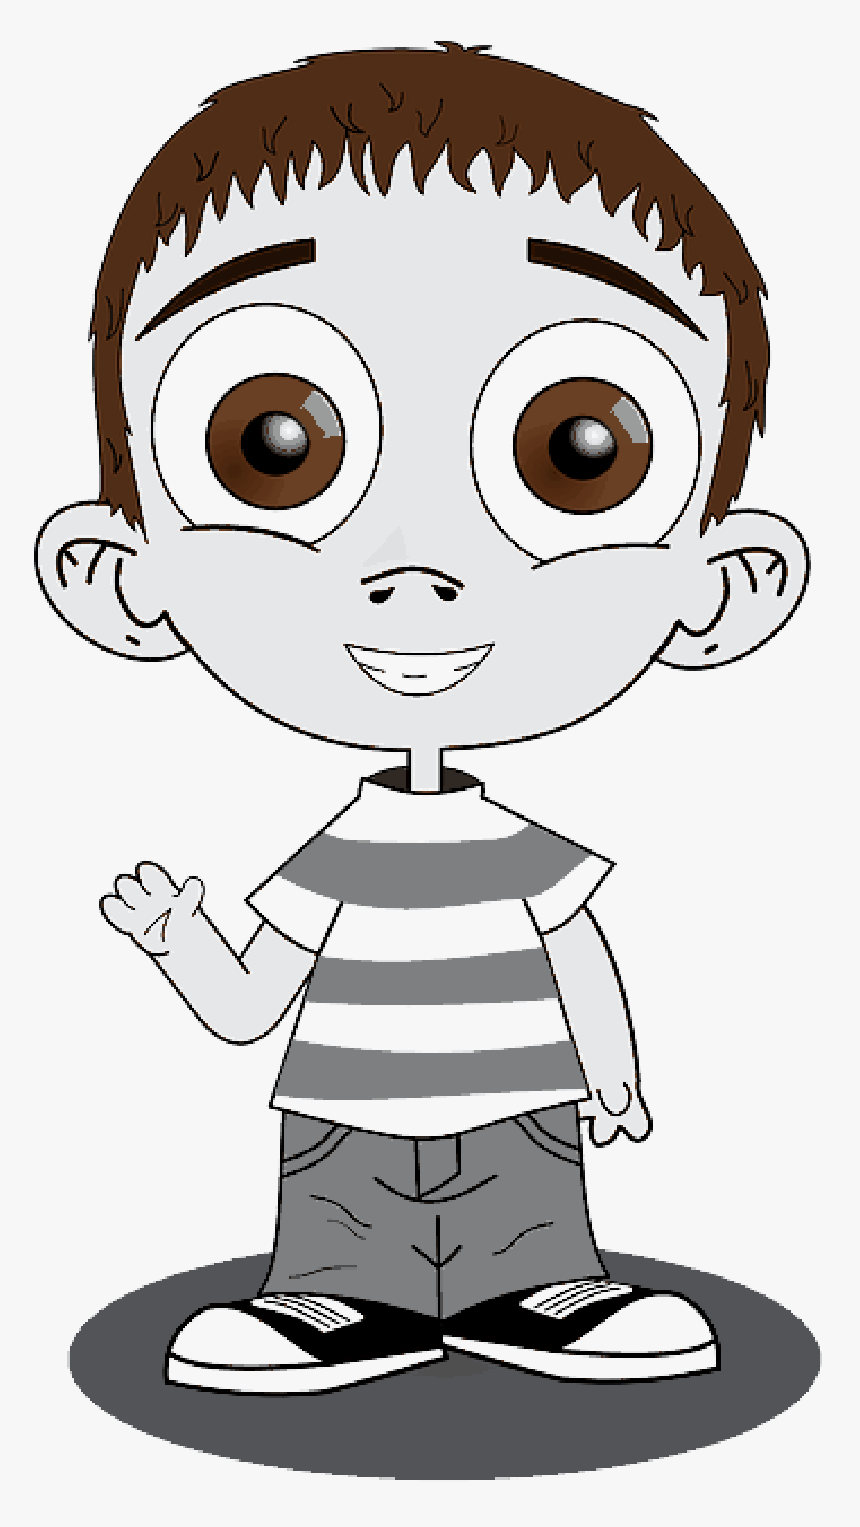 Clipart Boy With Big Eyes , Png Download - Boy With Big Eyes Cartoon, Transparent Png, Free Download